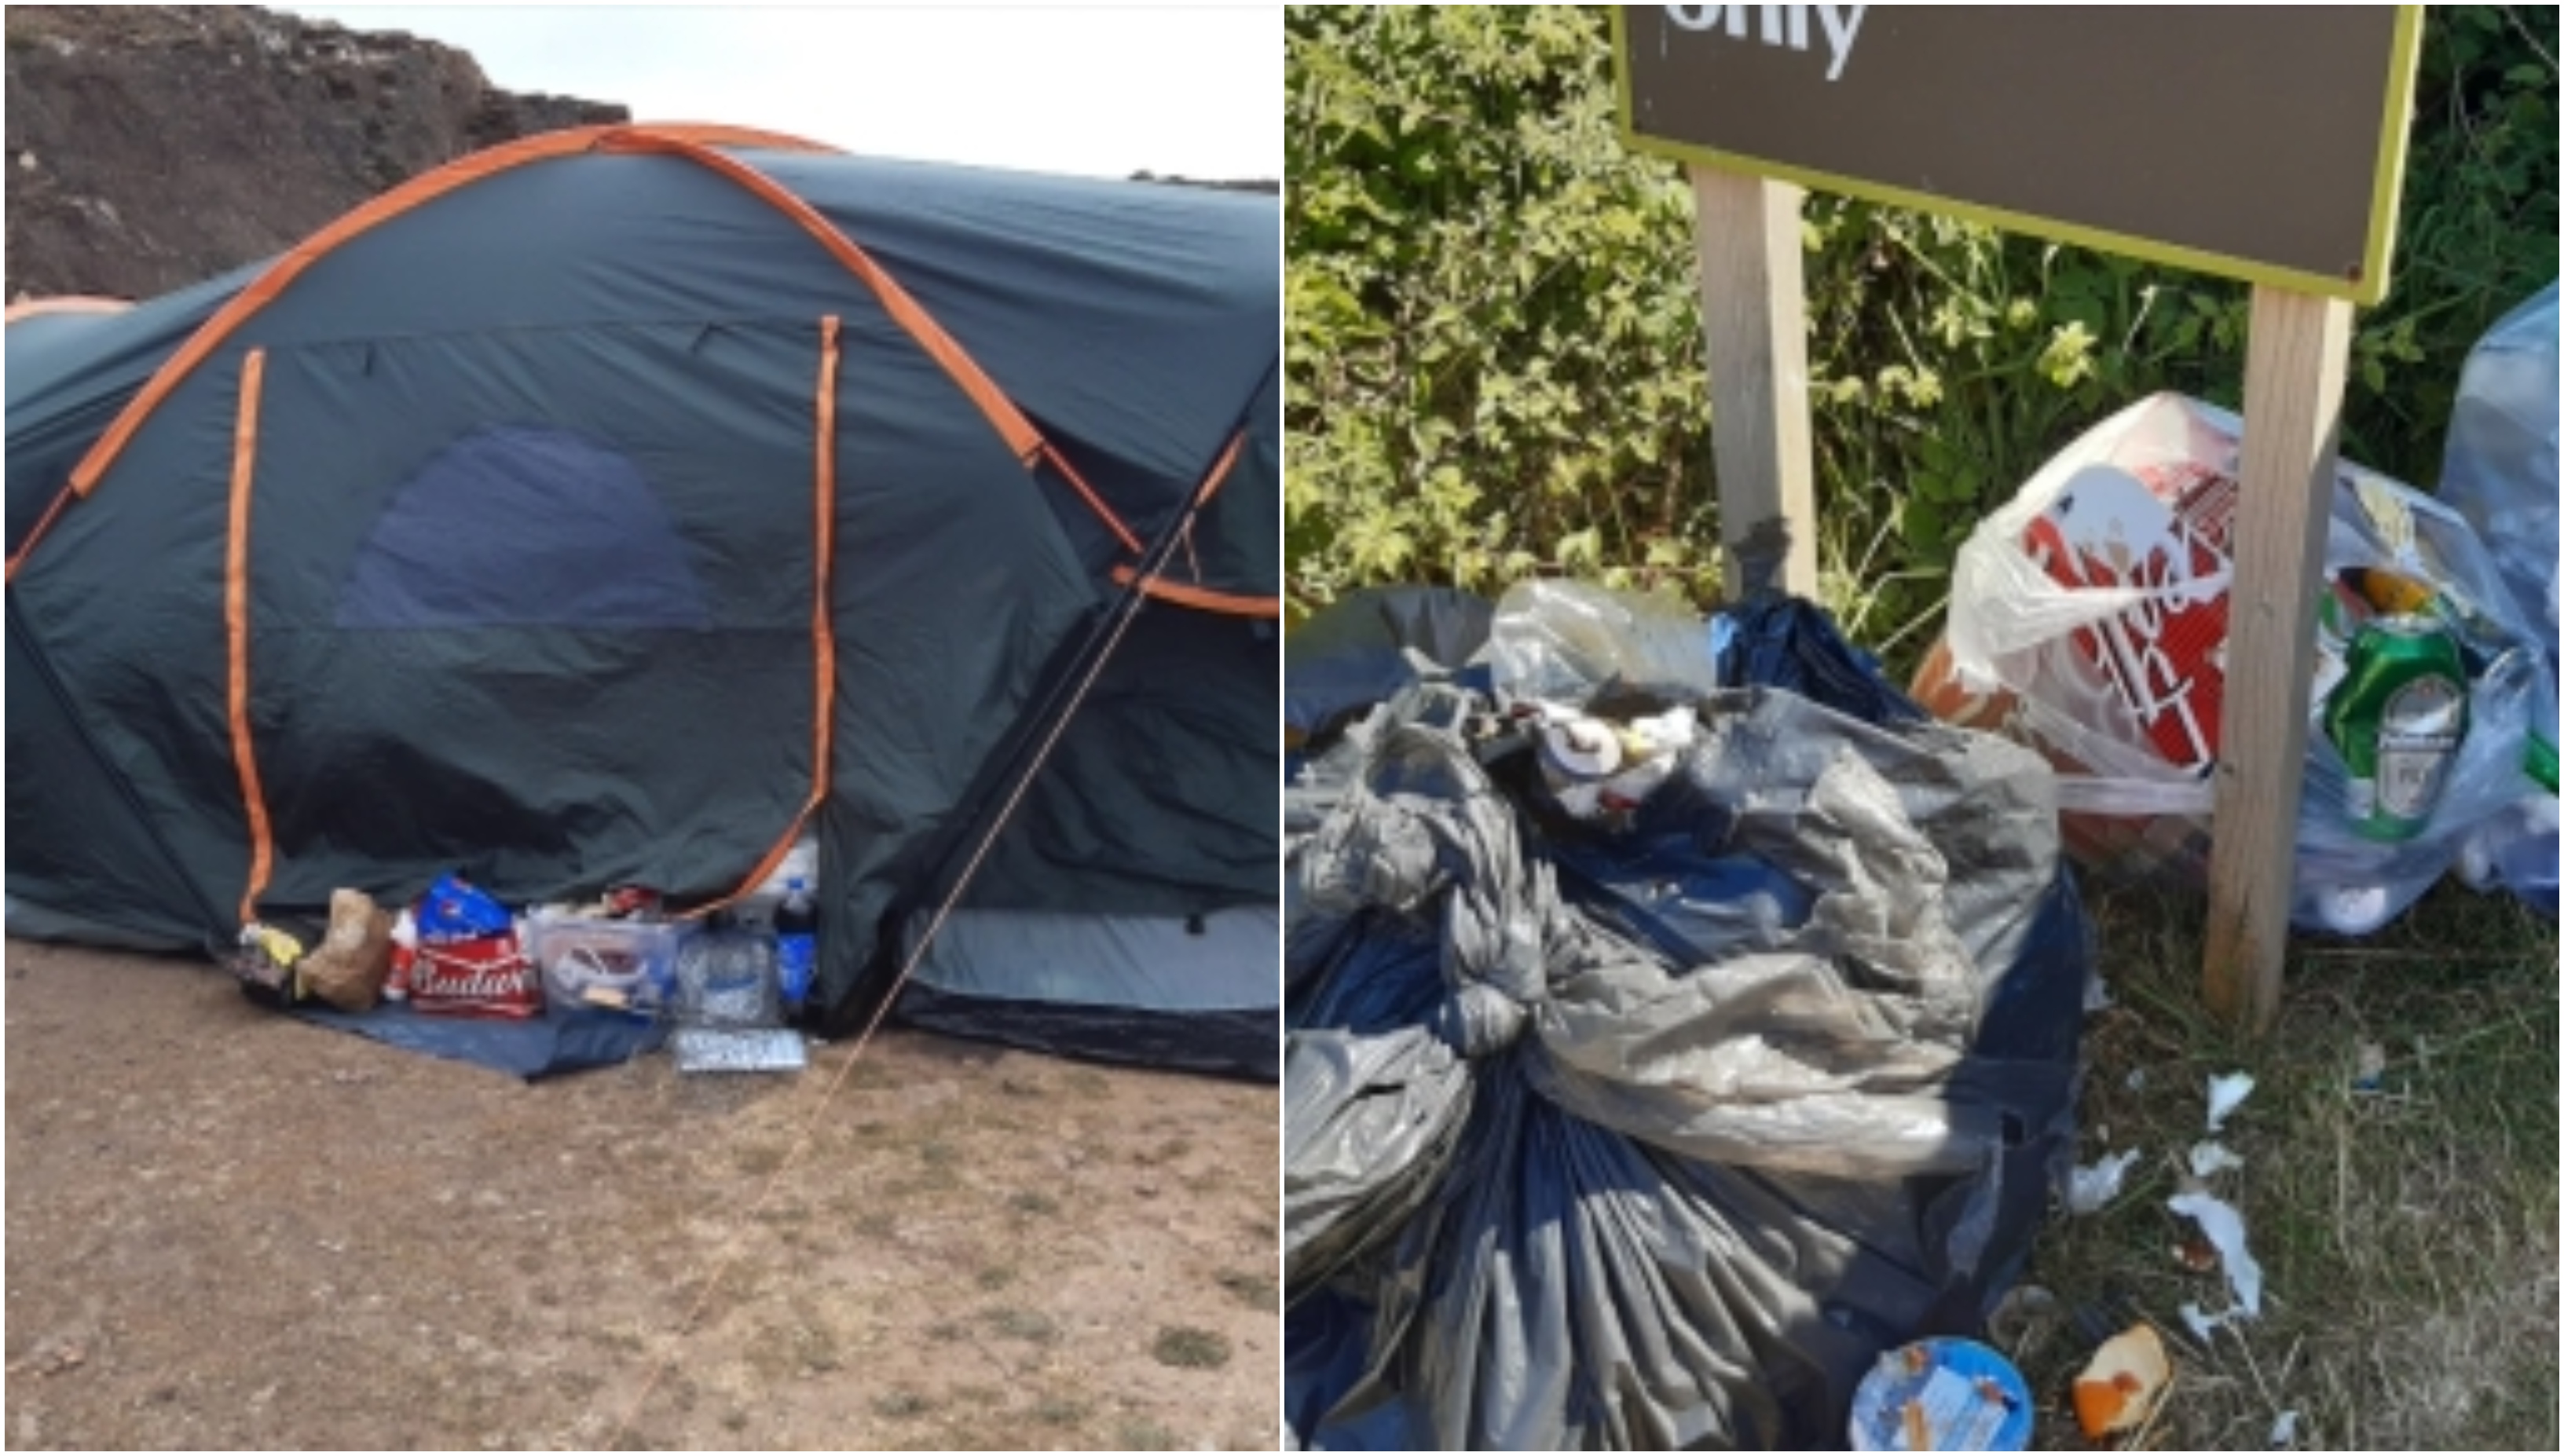 Wild camping banned on Dartmoor as illegal campers leave human waste